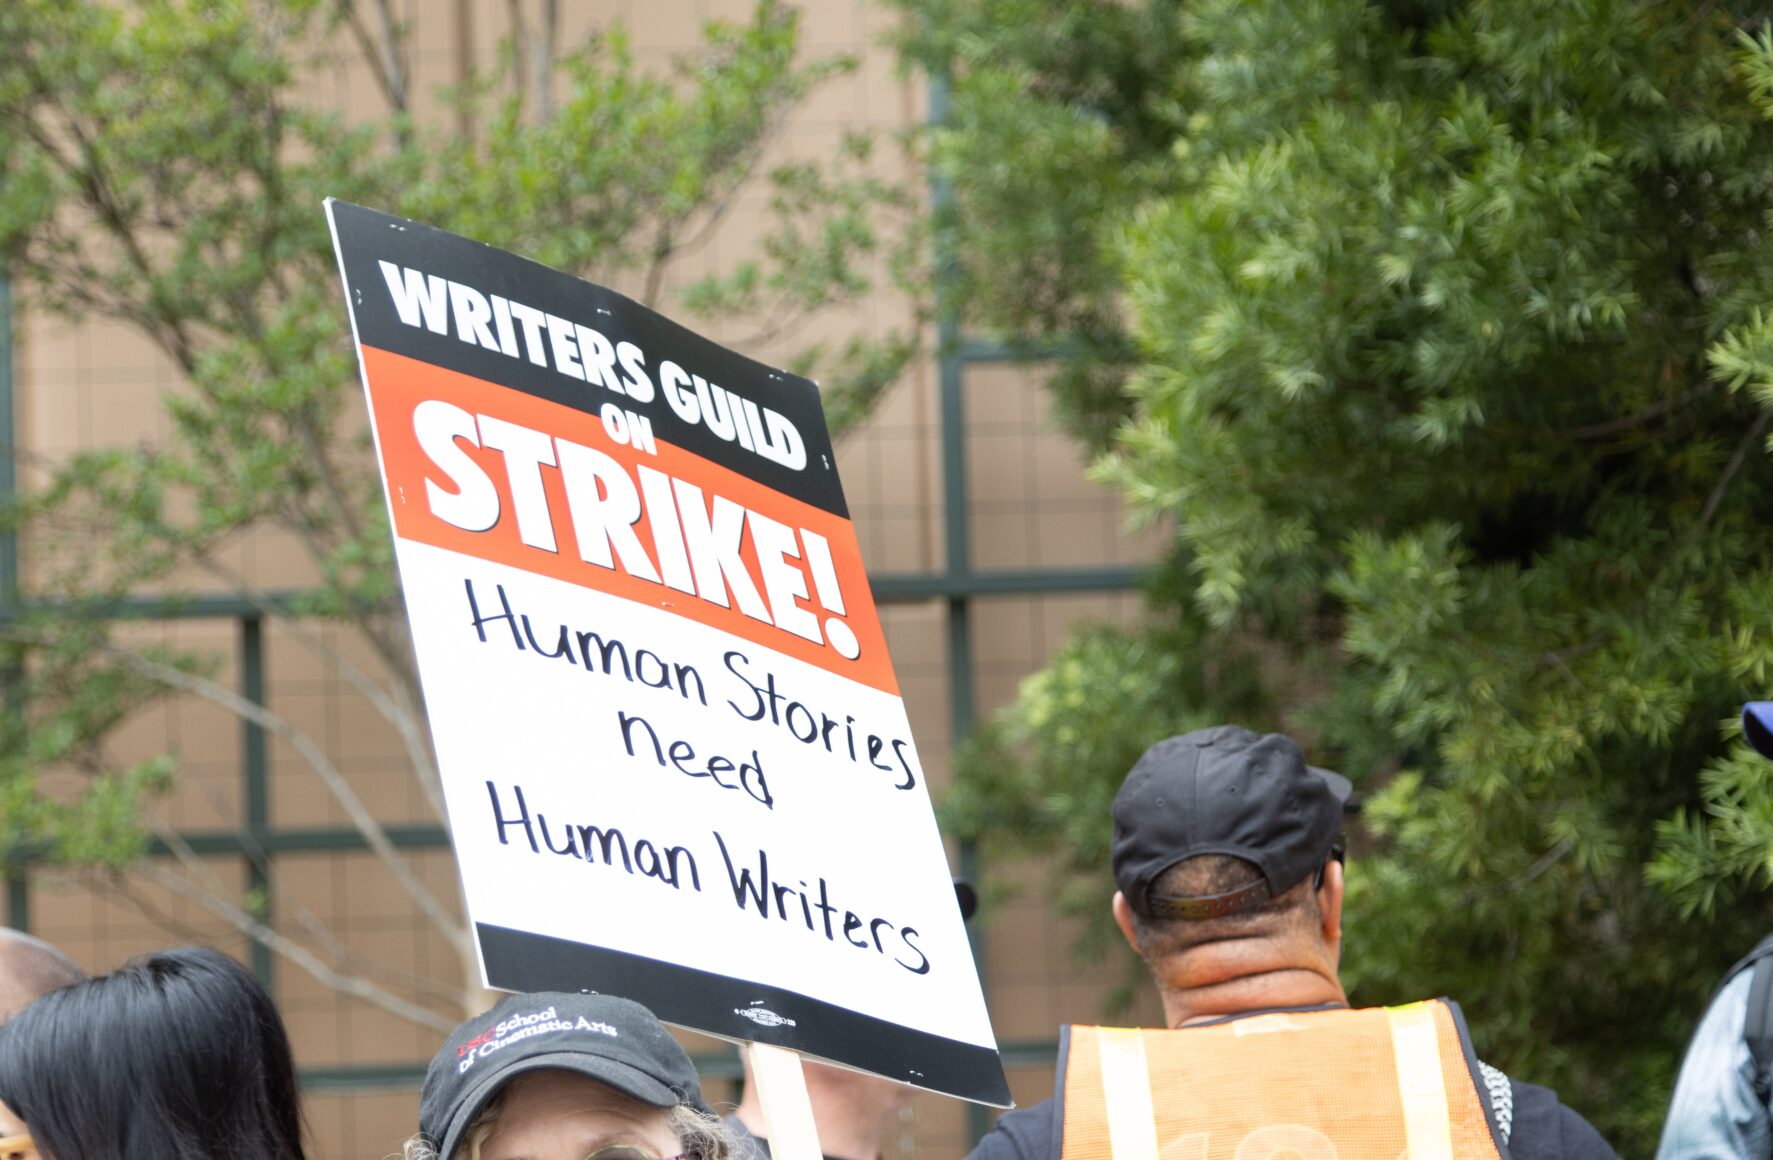 A WGA picket sign that reads "Writers Guild on Strike! Human Stories need Human Writers"